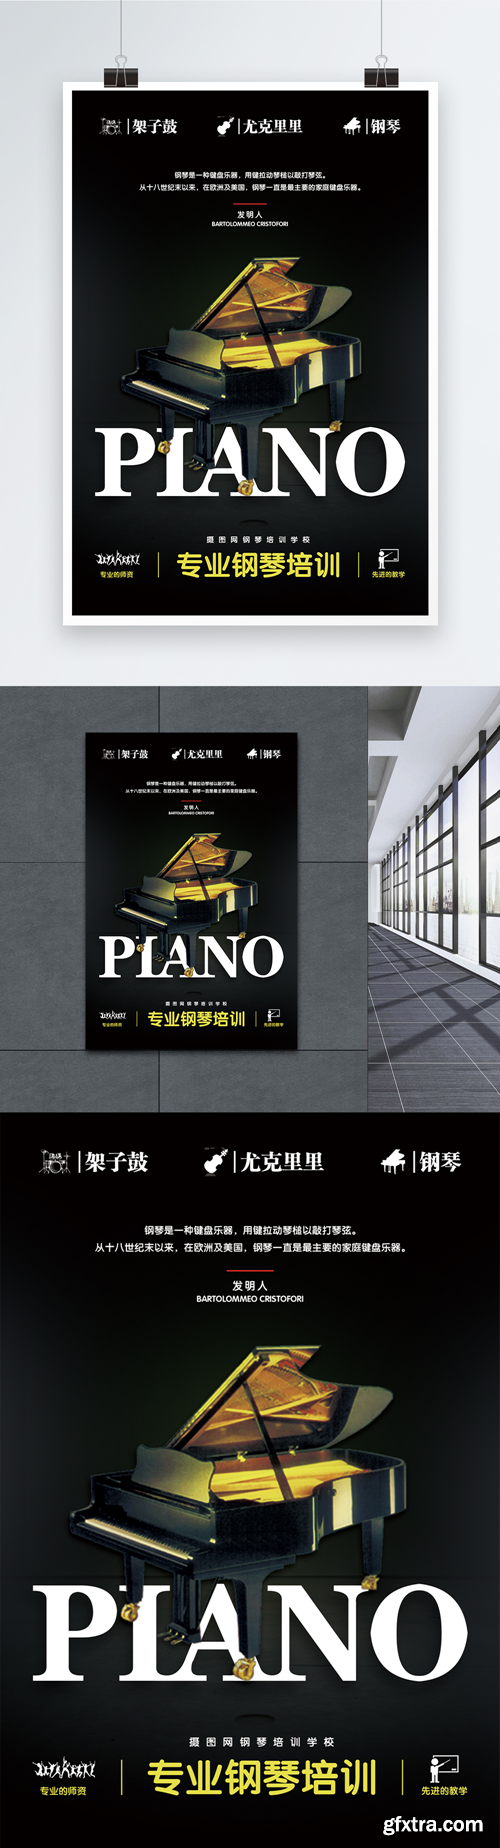 professional piano training admissions posters